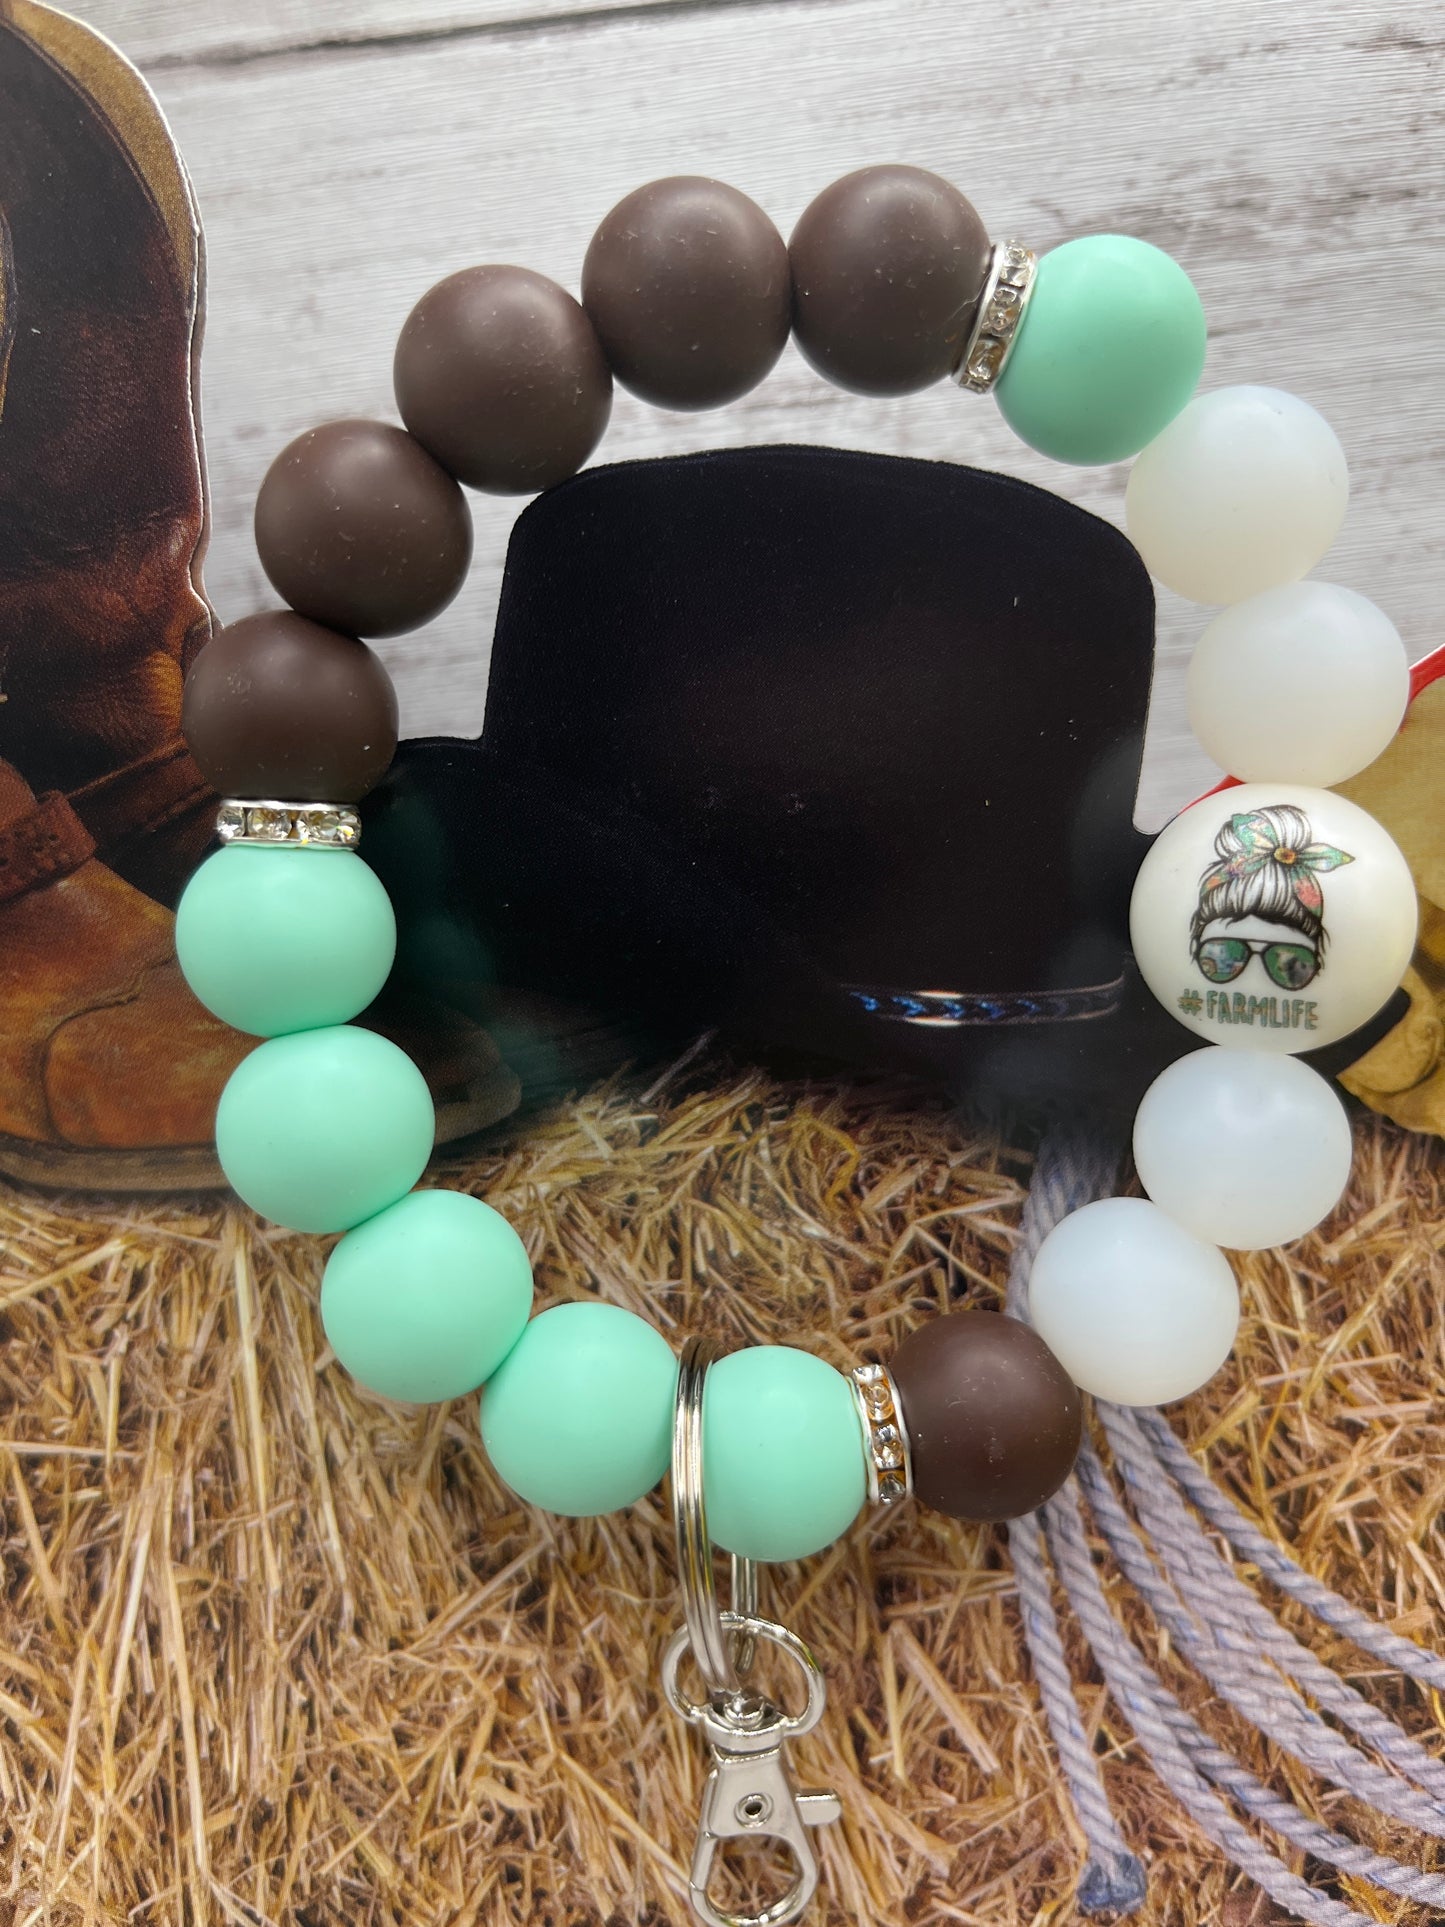 Handcrafted Wristlet/Keychain W/ #Farmlife Acrylic Bead, Brown, Mint and White Pearl White color Beads